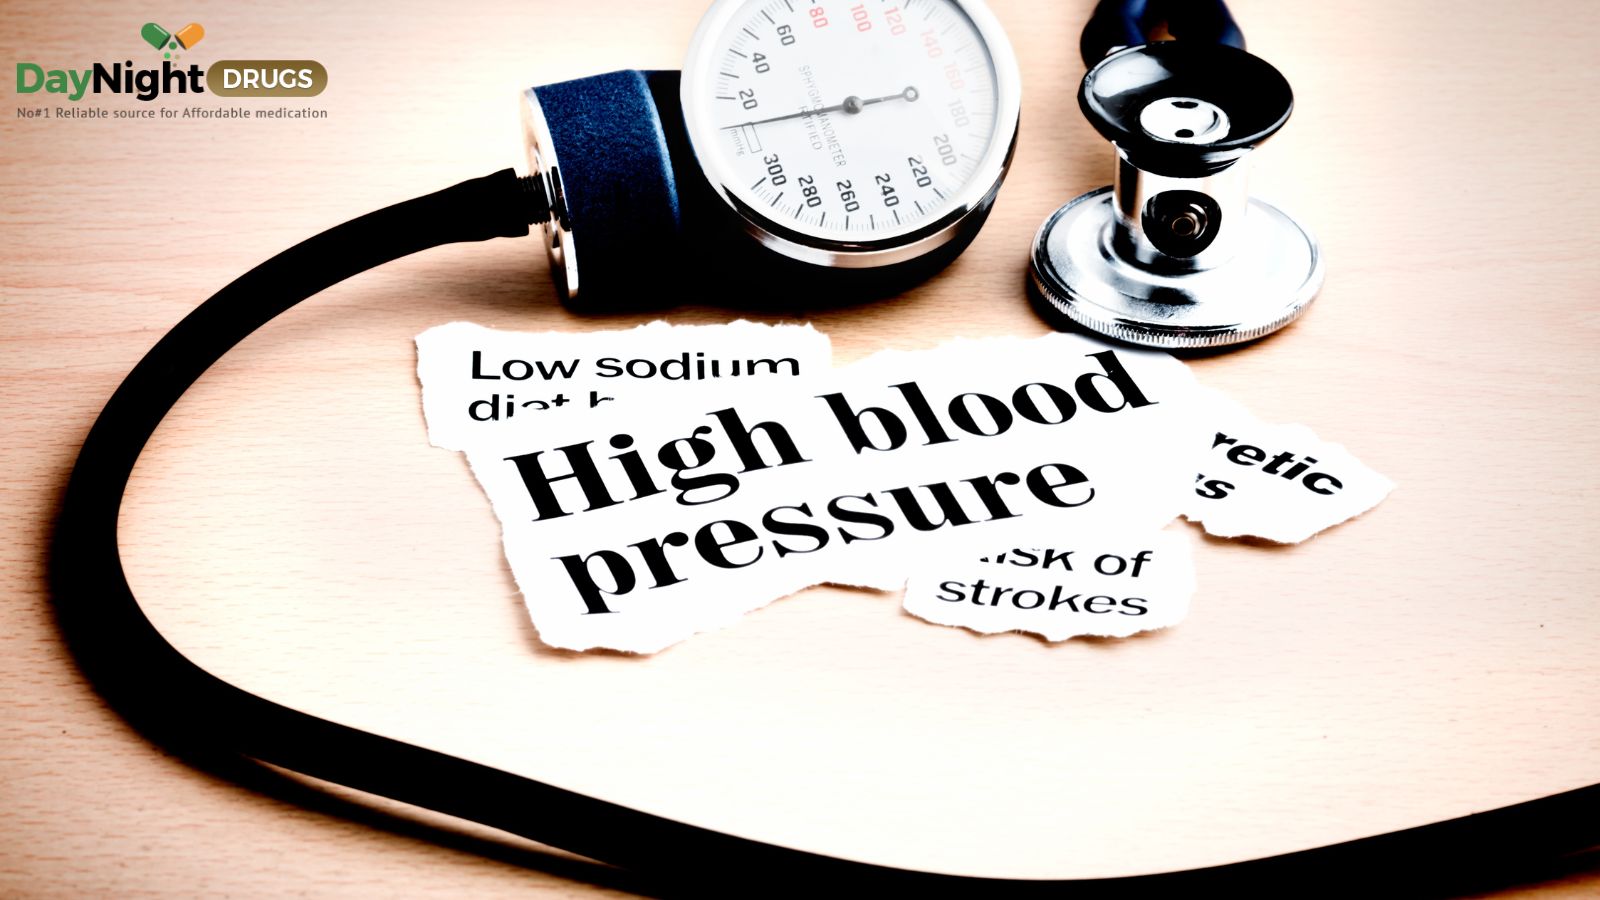 High blood pressure increases the risk of heart problems in mid